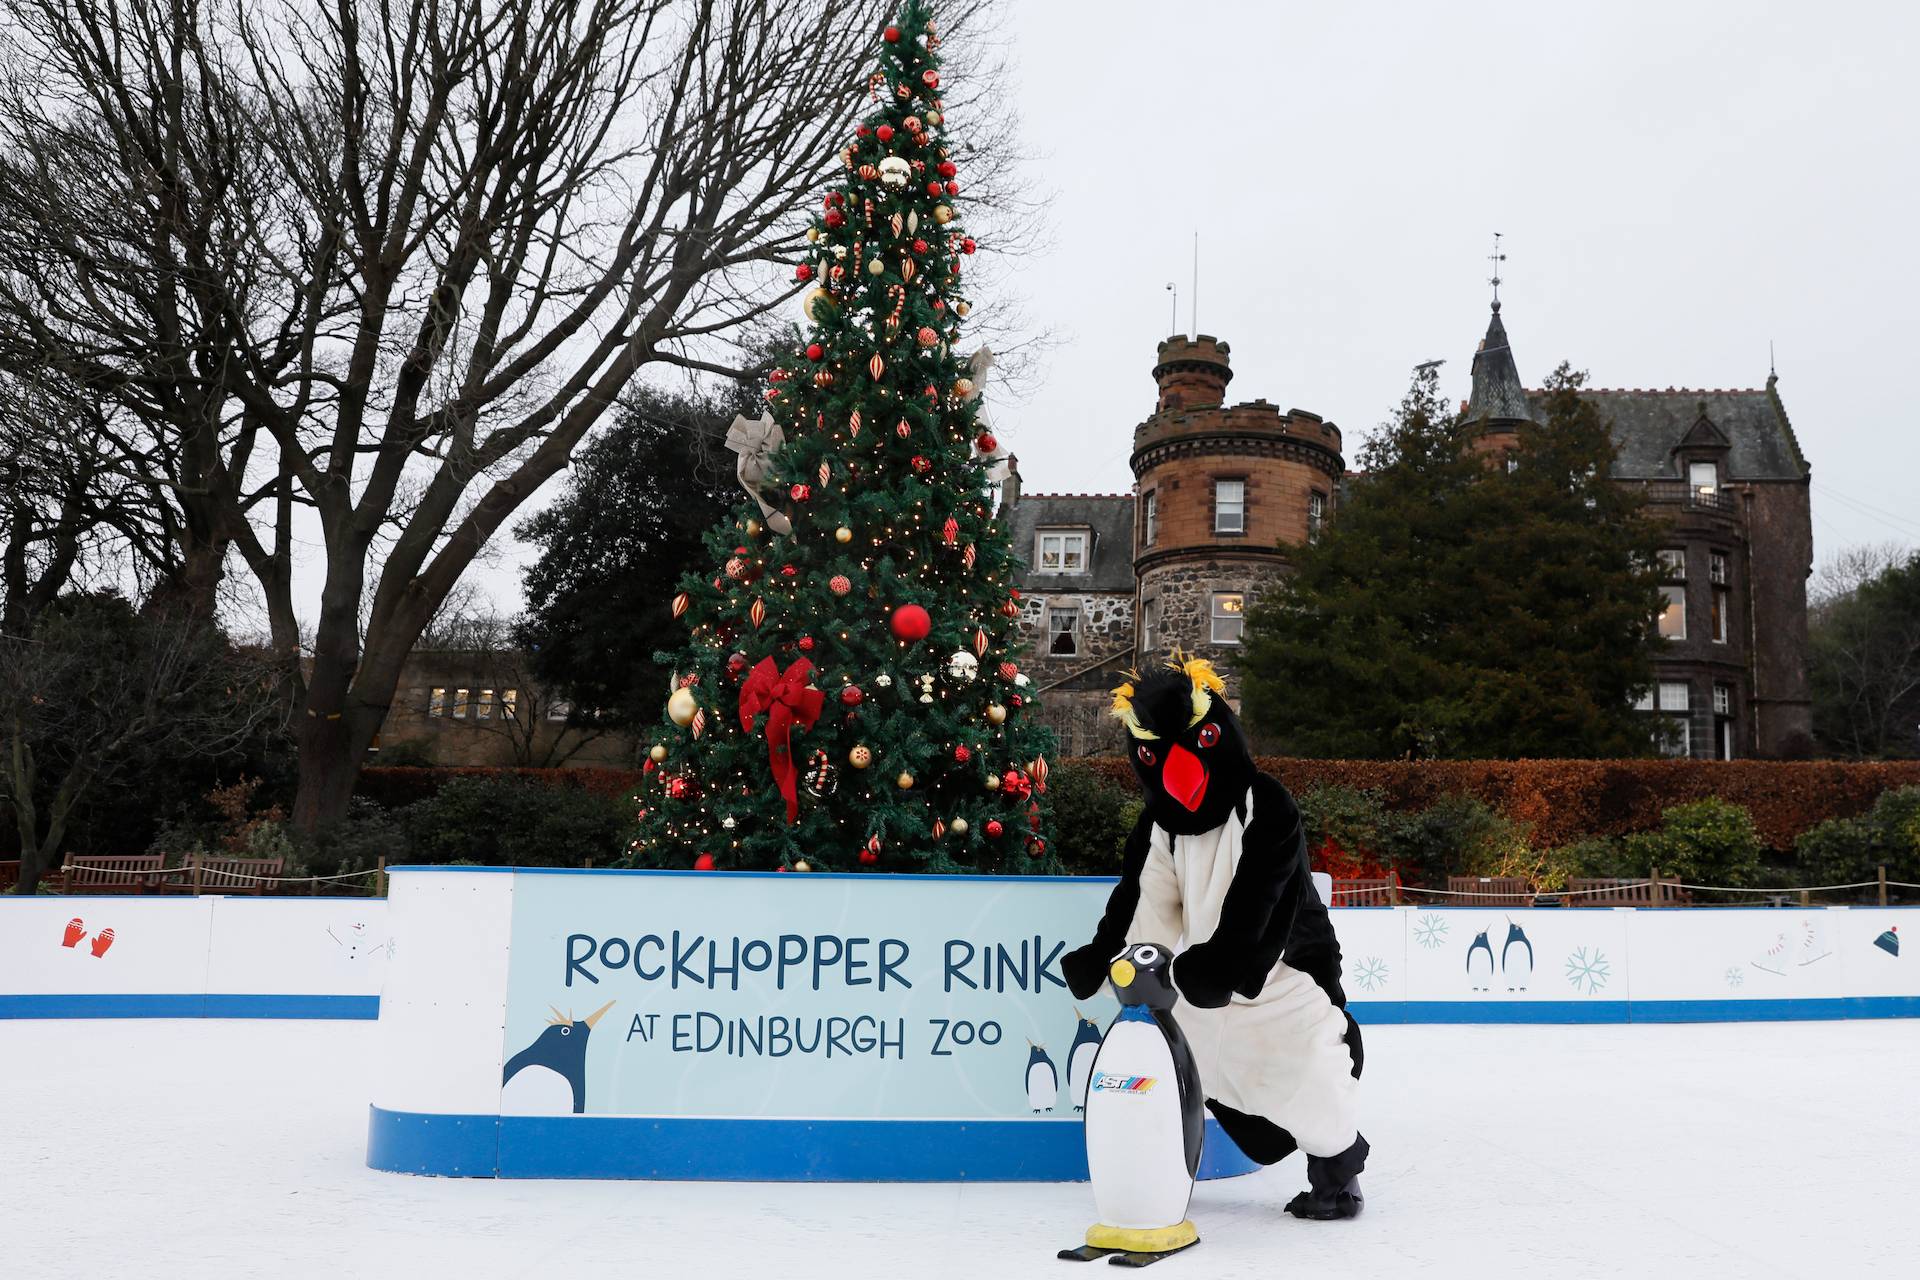 Rockhopper mascot skating on rink in front of Christmas tree in December 

Image: LAURA MOORE 2023